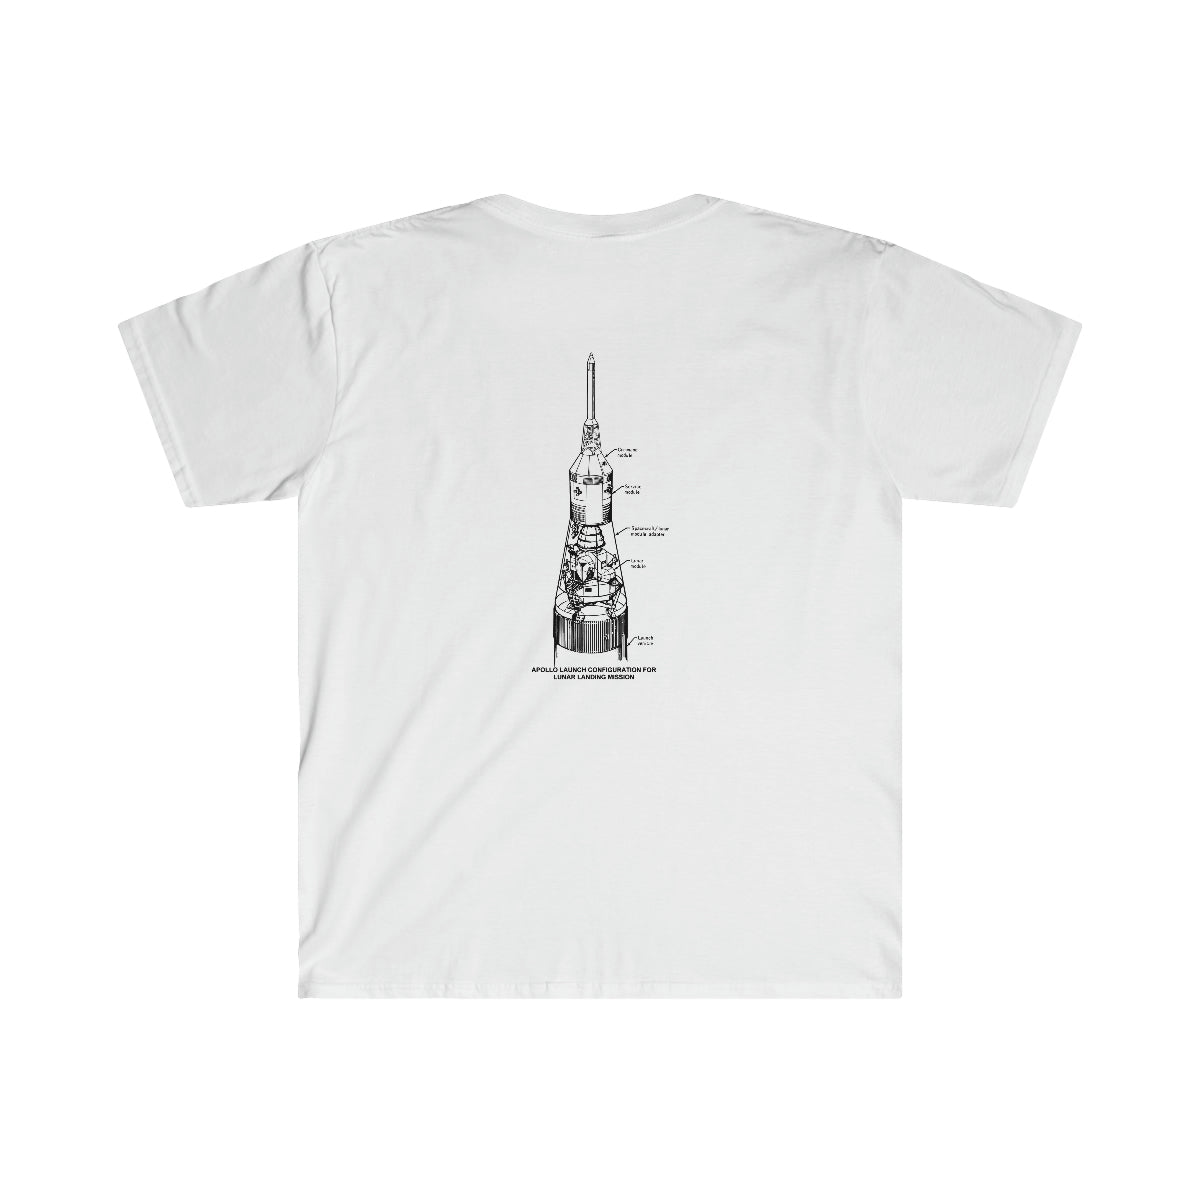 An Apollo Launch Configuration T-Shirt with a drawing of a tower.